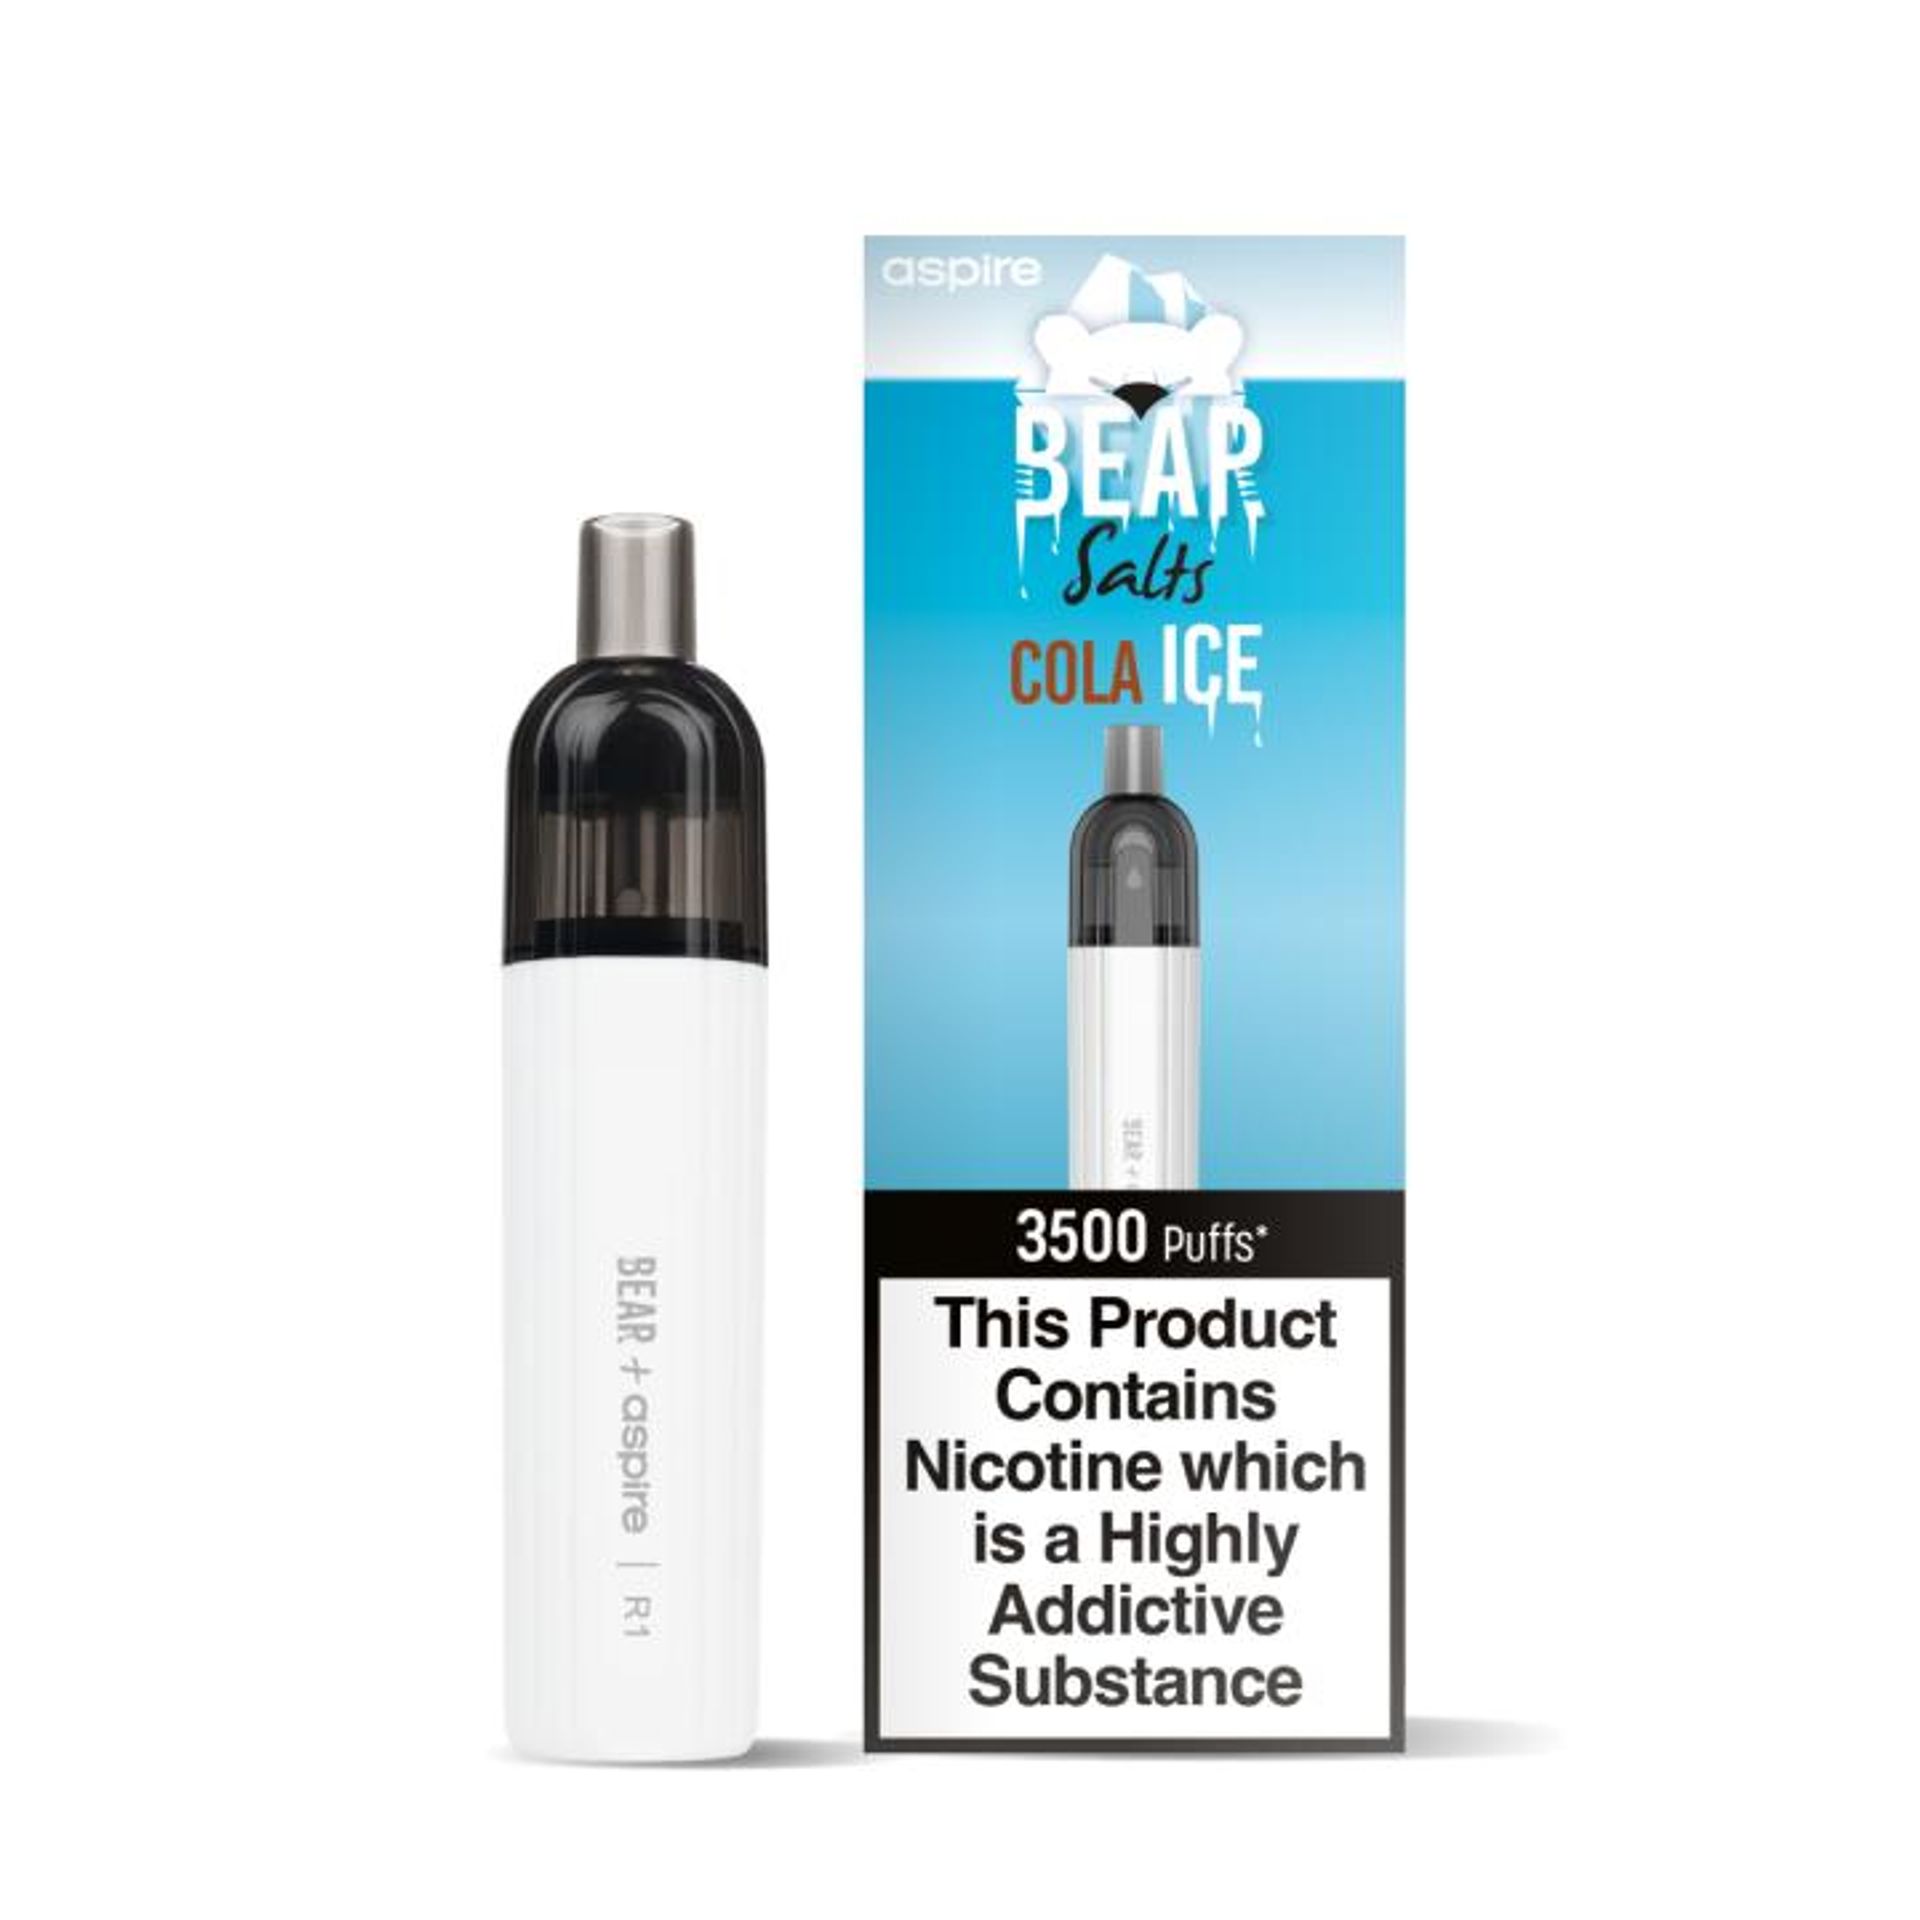 Image of Cola Ice by Bear Aspire R1